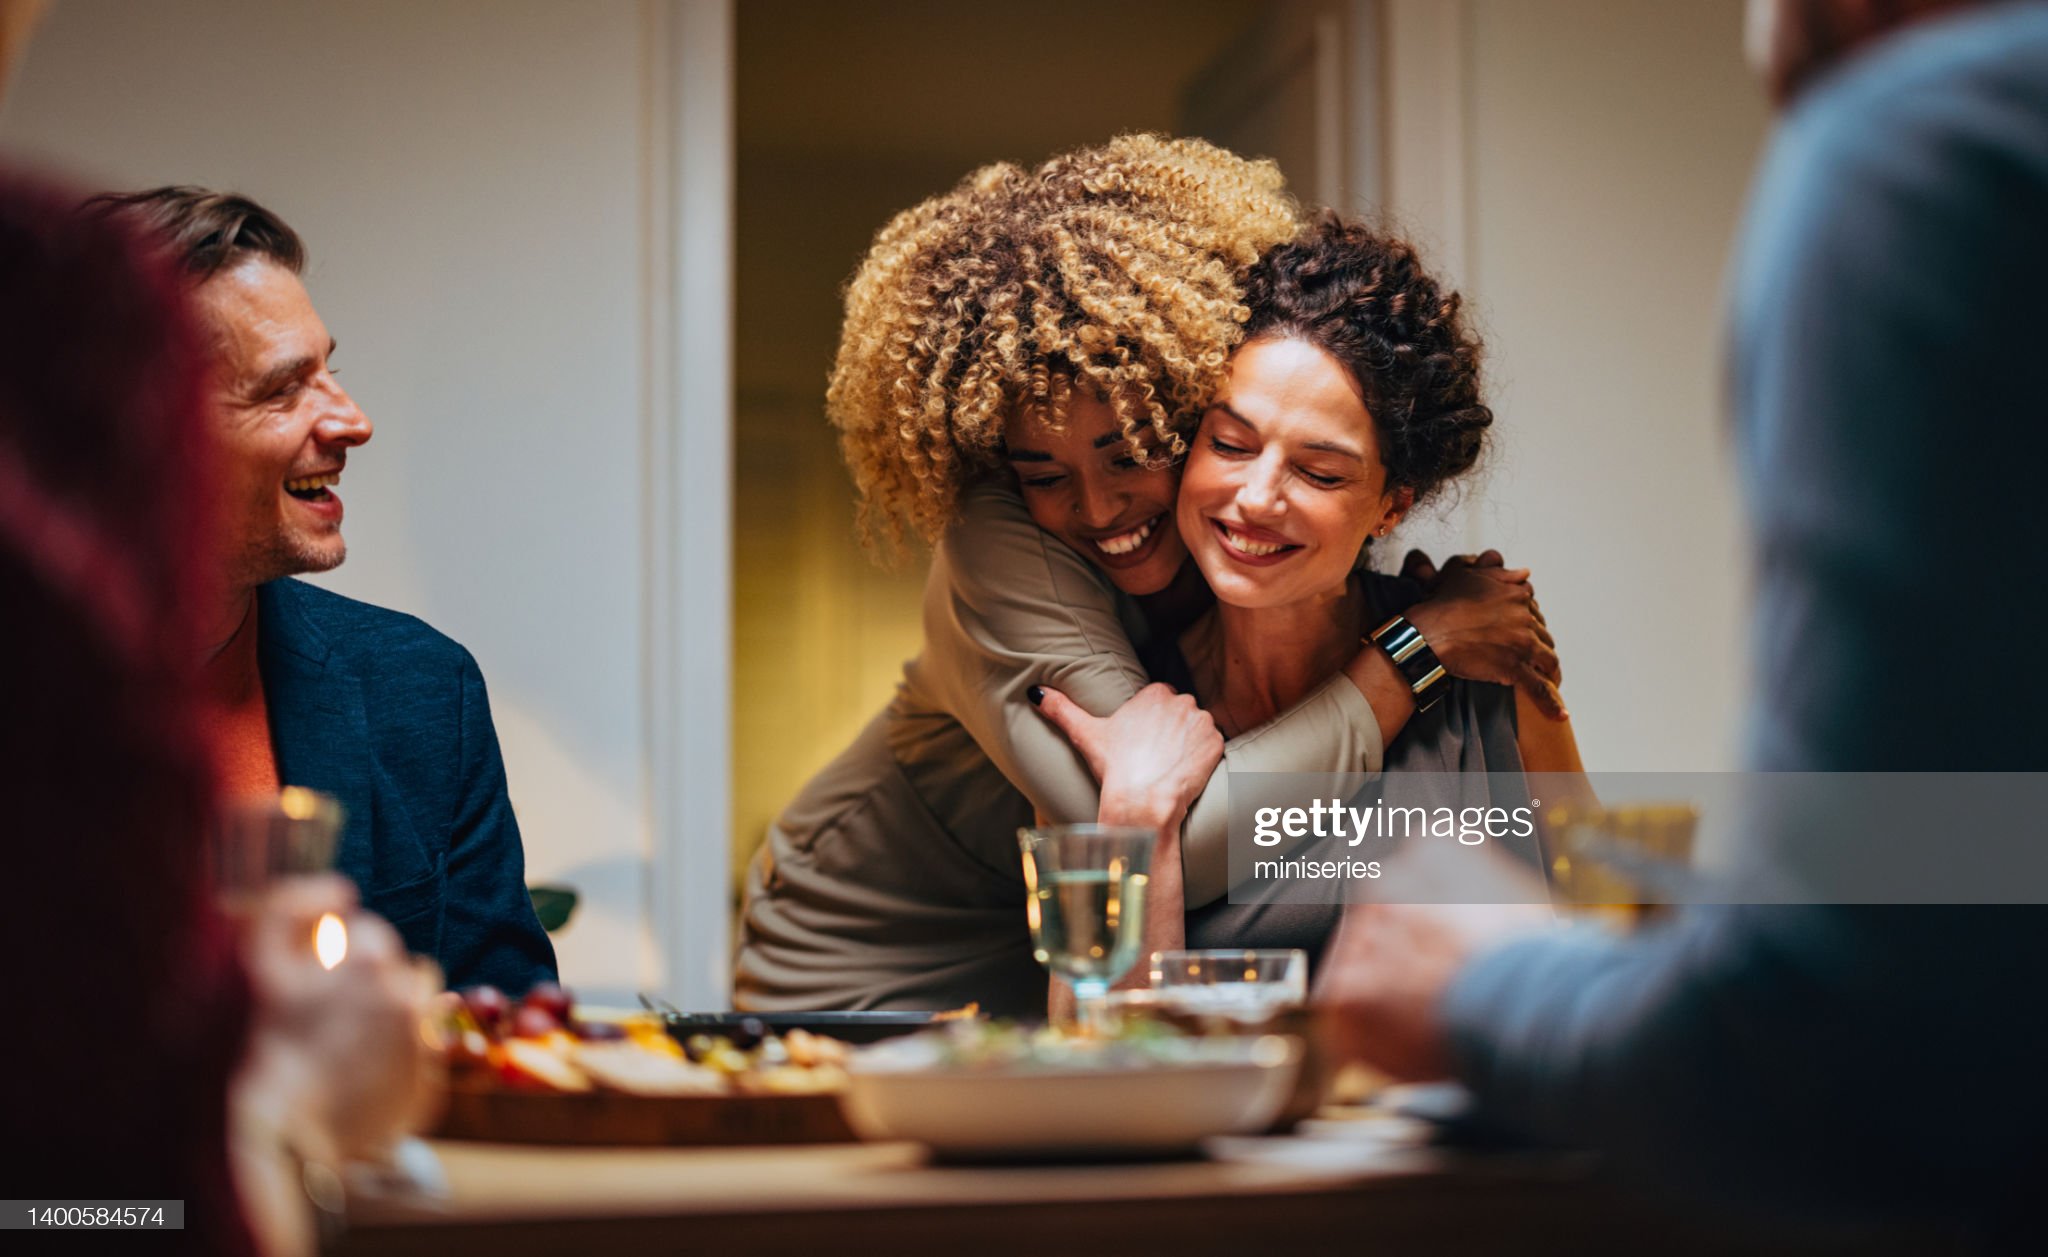 Cheerful smiling African-American woman embracing her female friend during a dinner with family and friends.